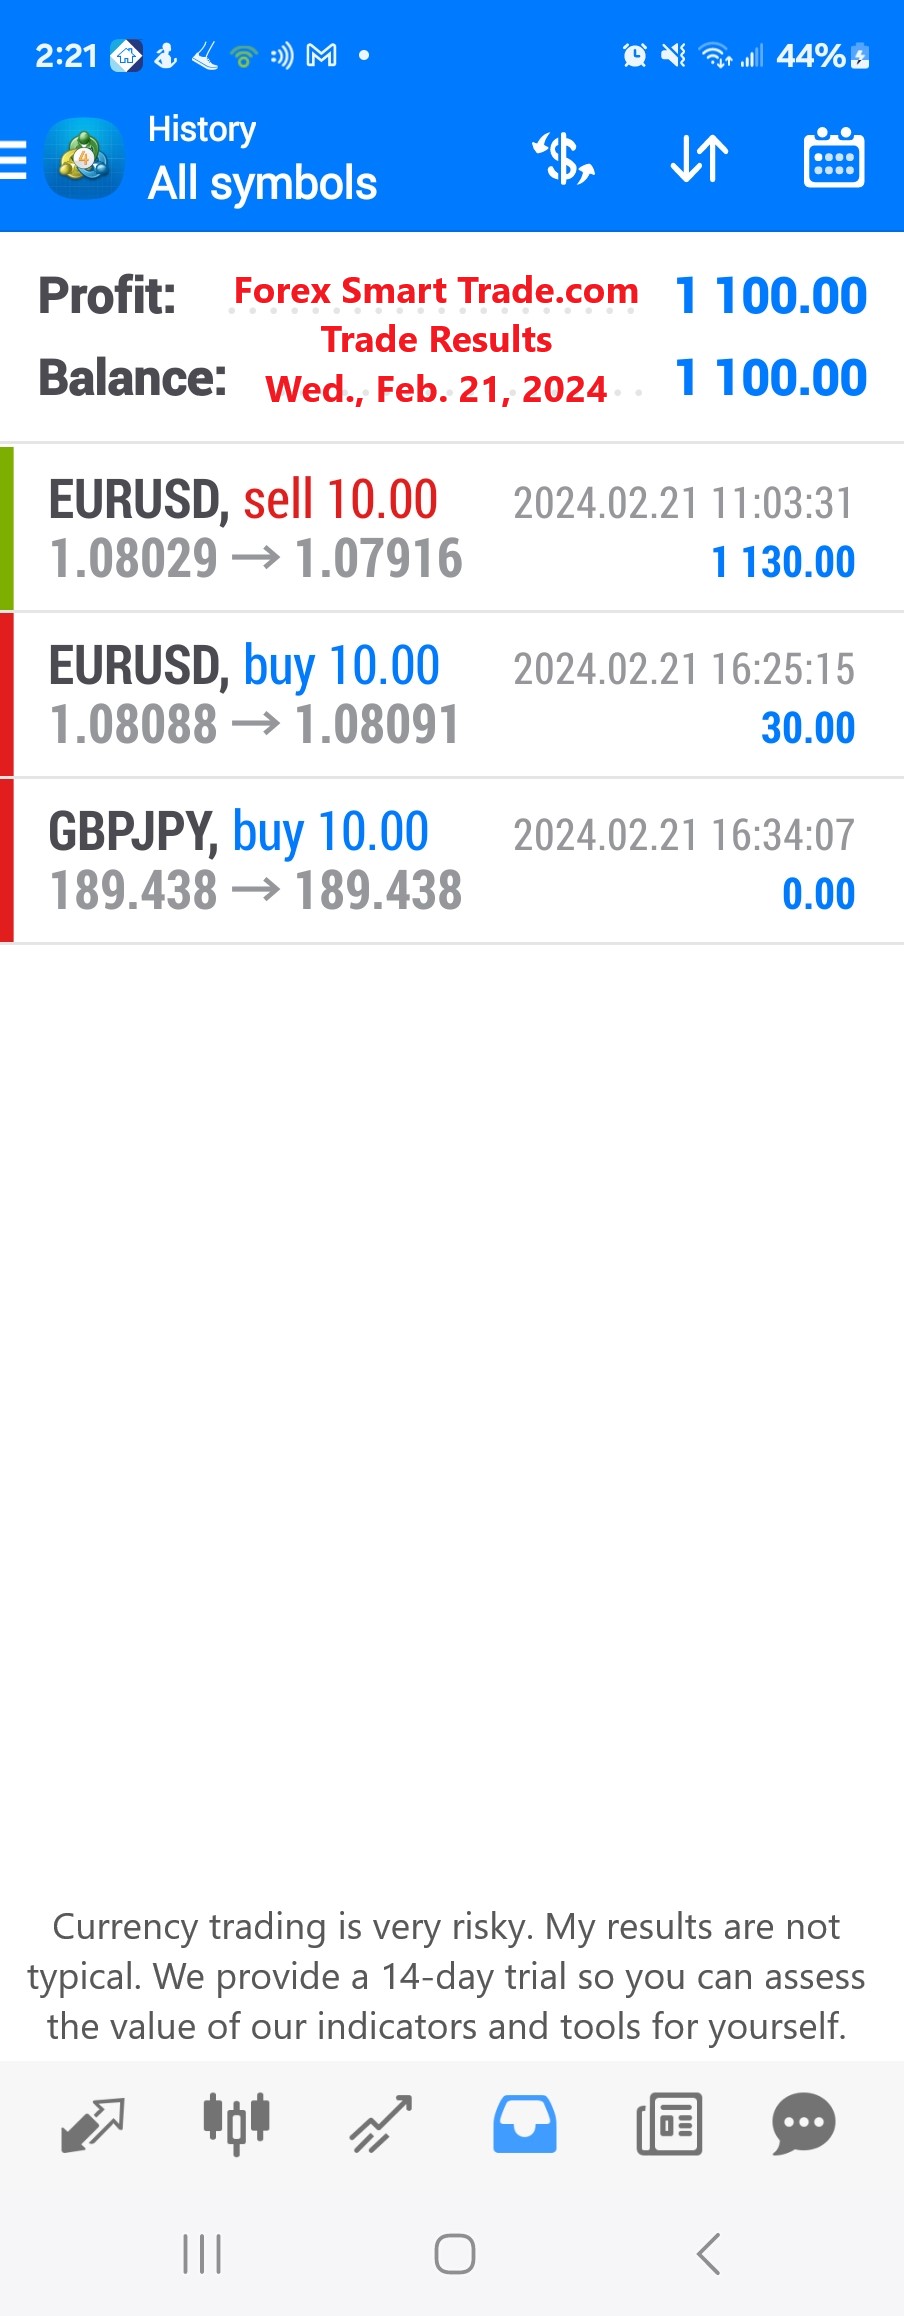 Today’s-Forex-Smart-Trade’s-Trade-Results